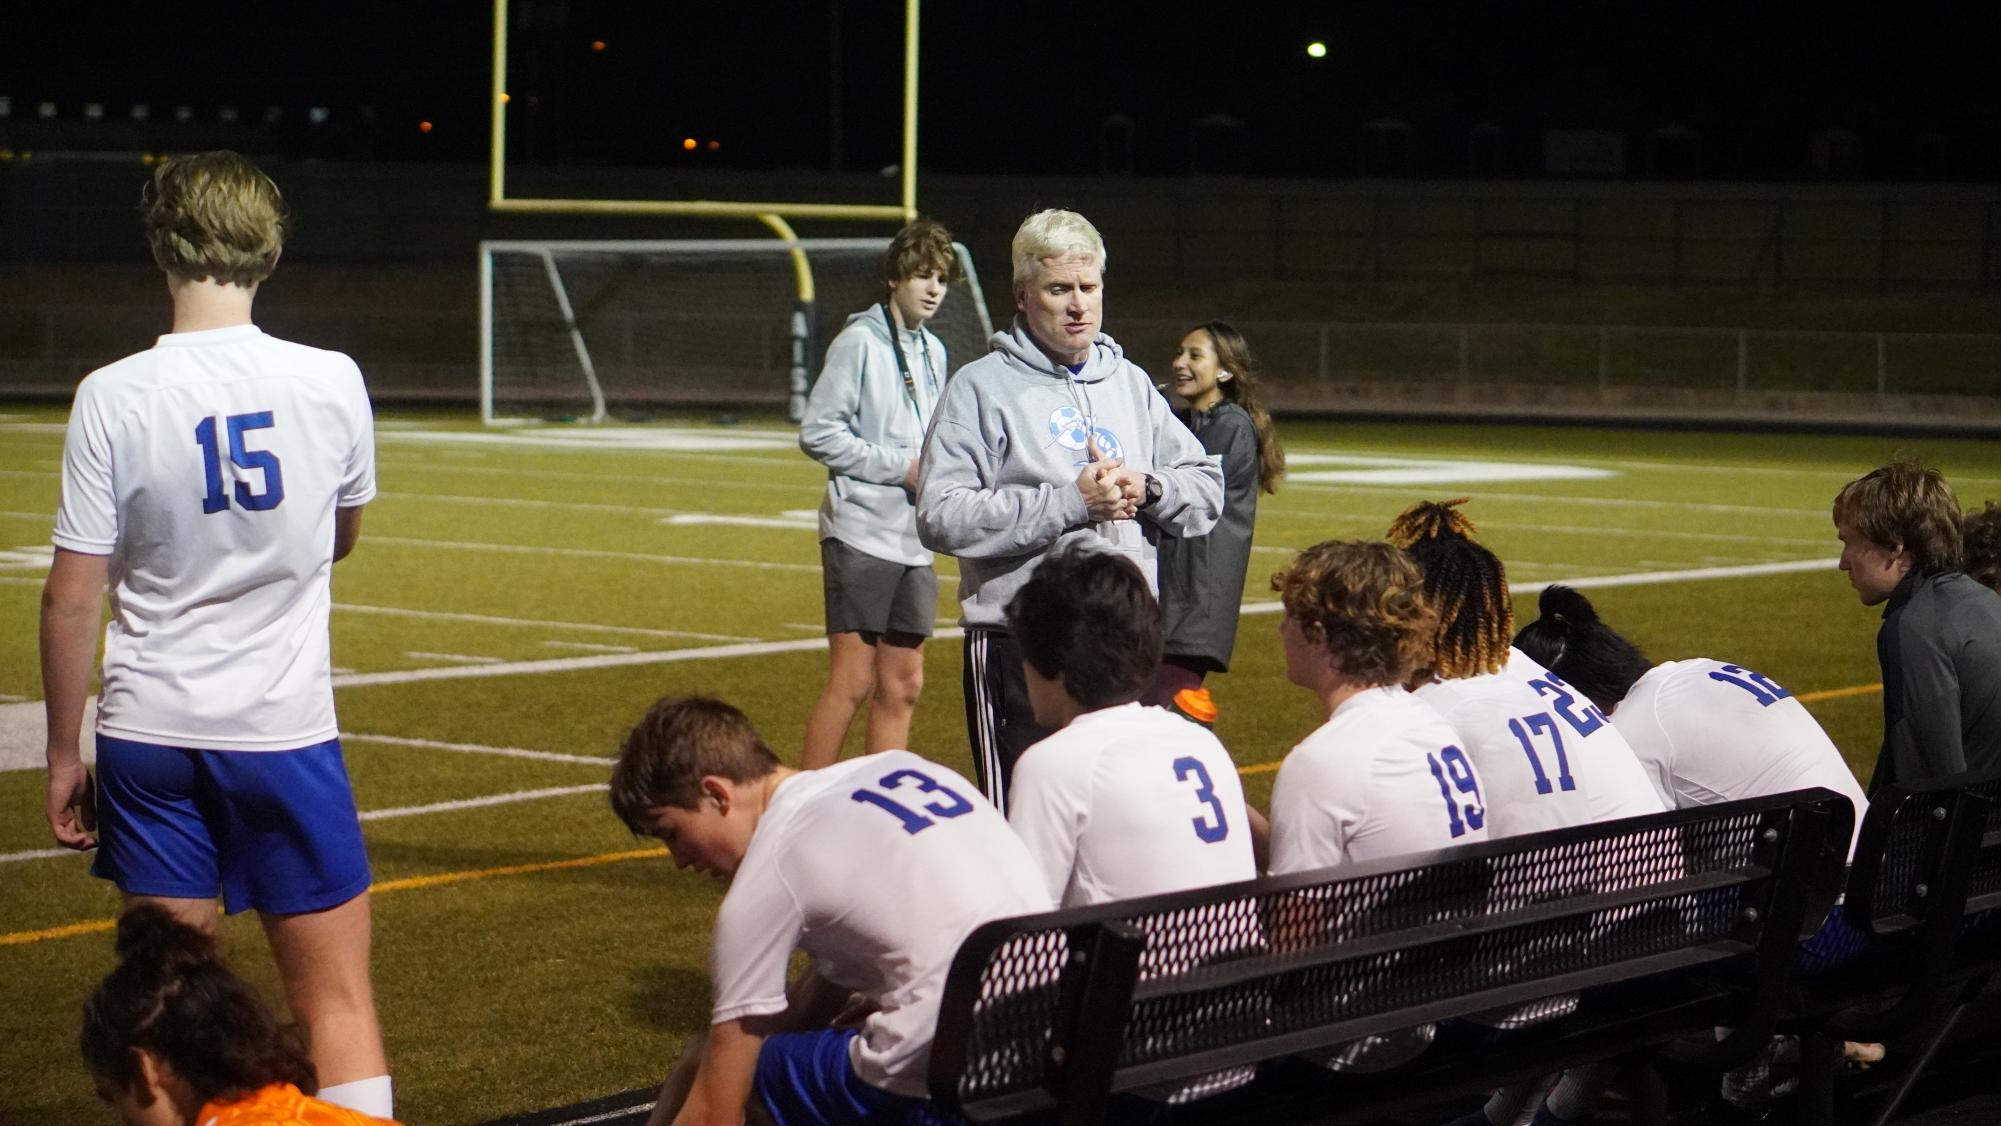 Coach Nick Martin speaks to the varsity soccer team during half time.